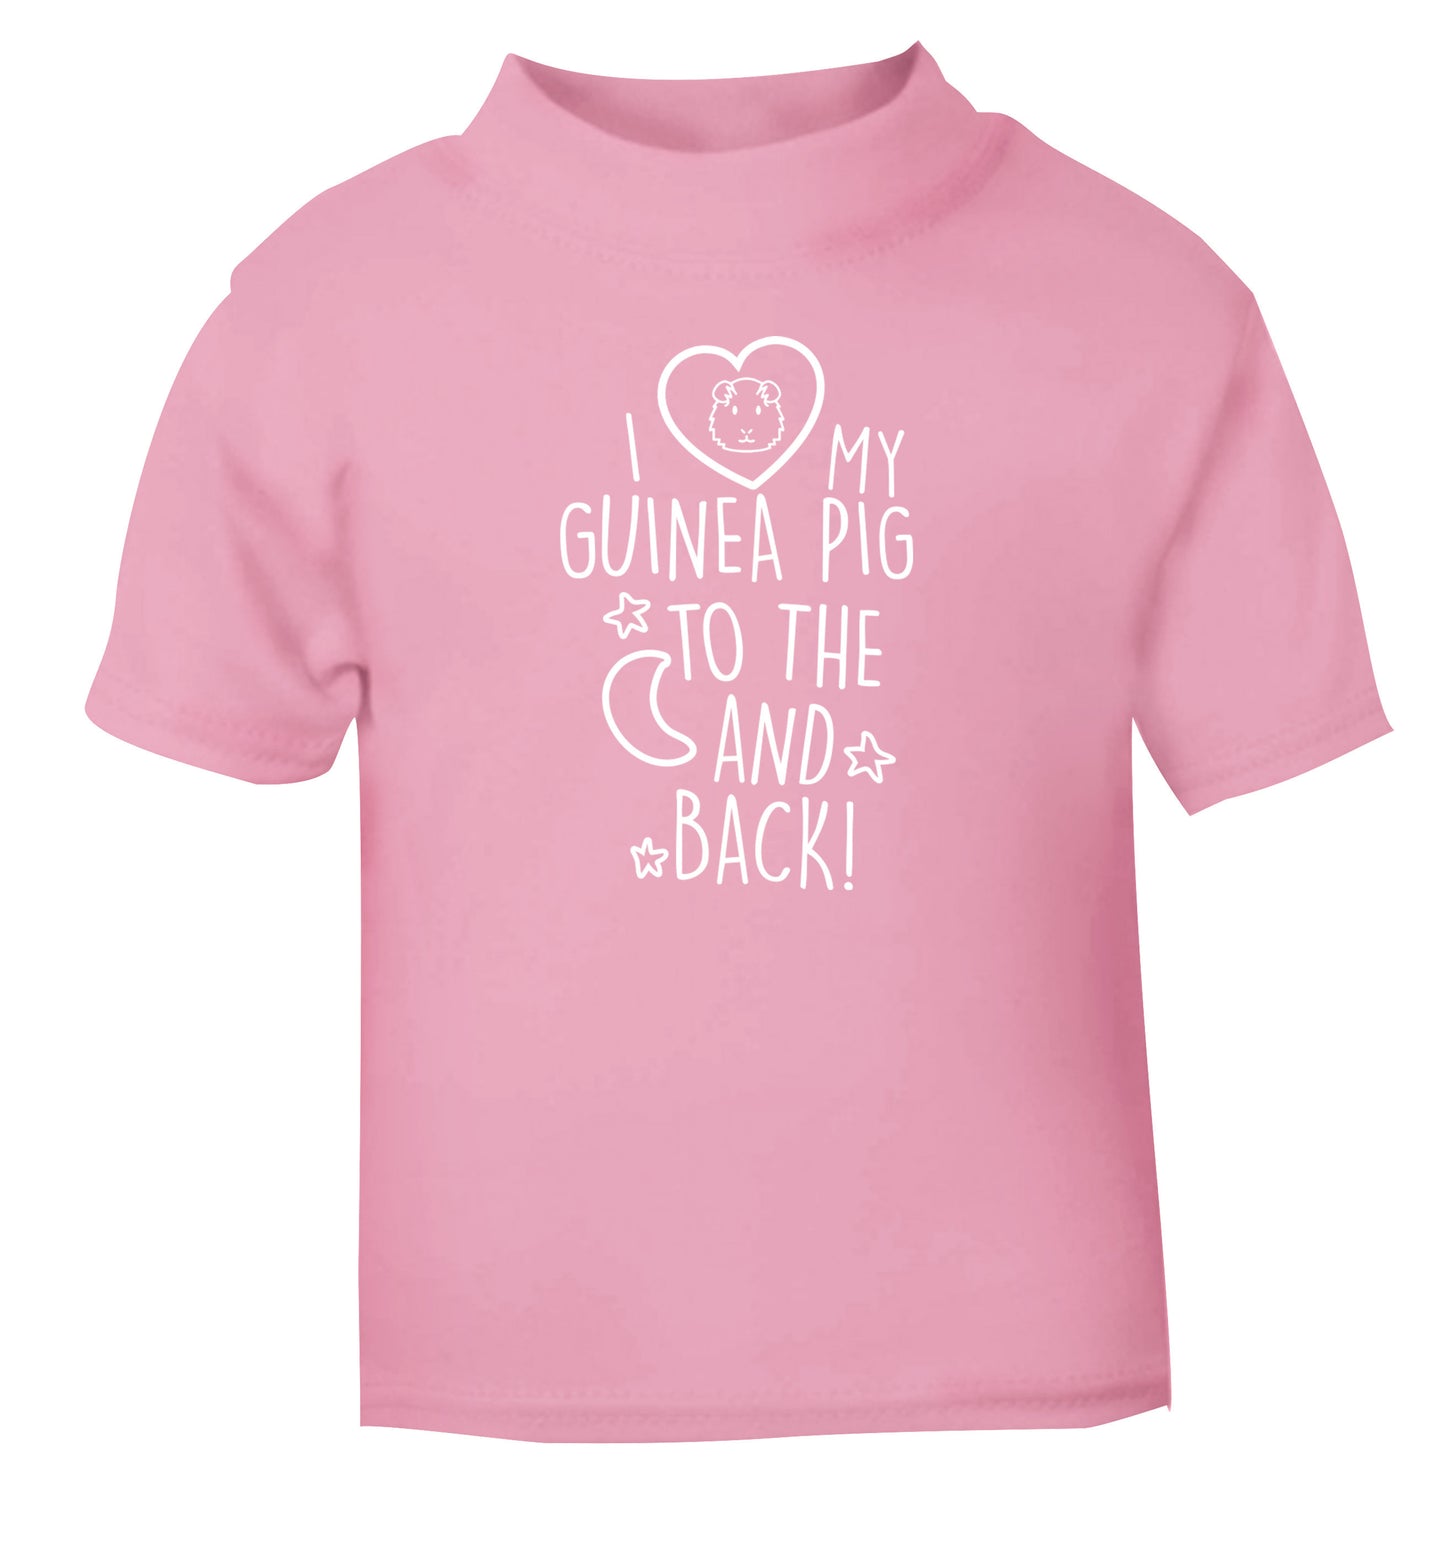 I love my guinea pig to the moon and back light pink Baby Toddler Tshirt 2 Years